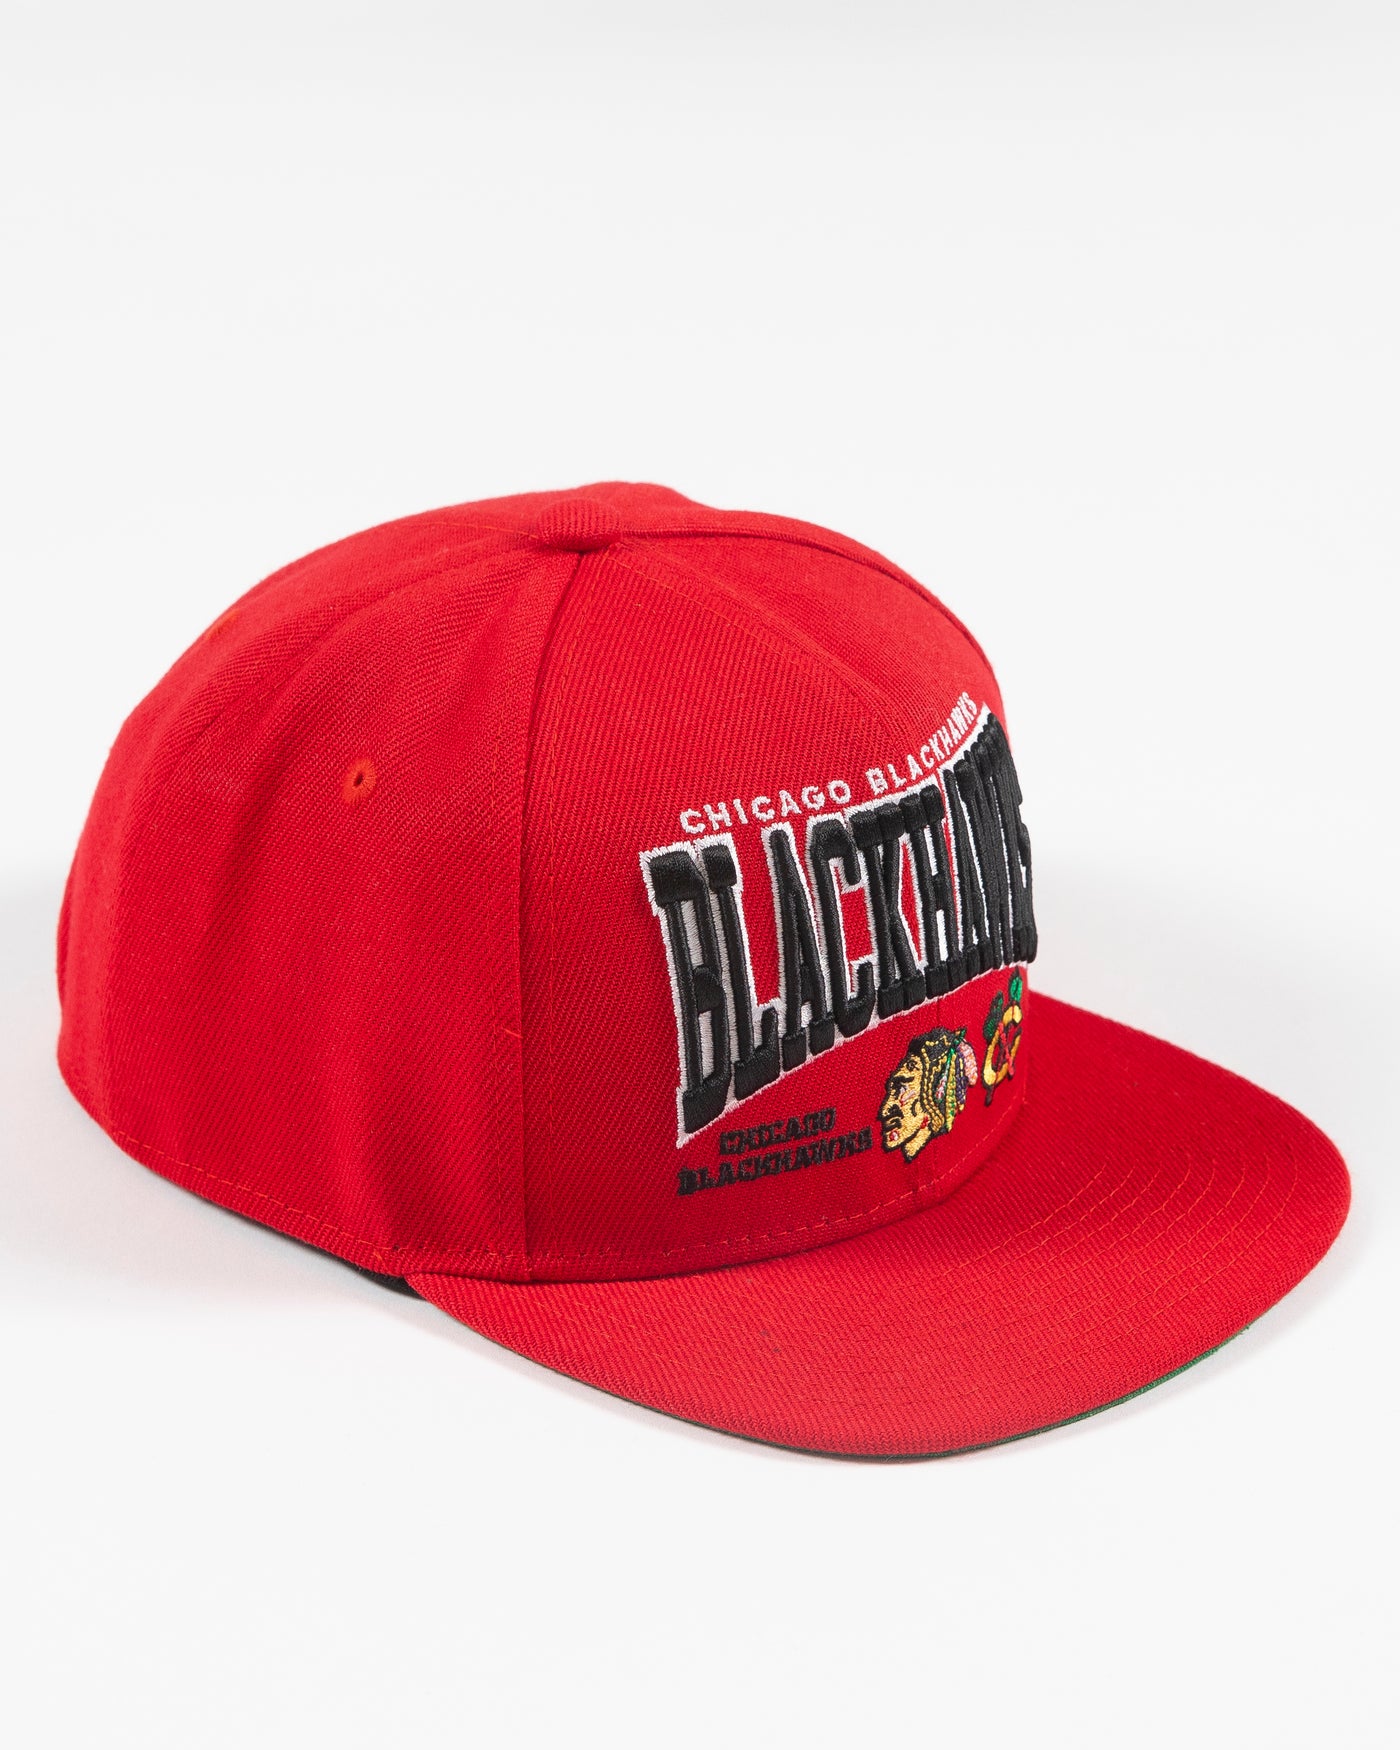 red Mitchell & Ness youth snapback with Chicago Blackhawks wordmark graphic and primary and secondary logos embroidered on front - right angle lay flat